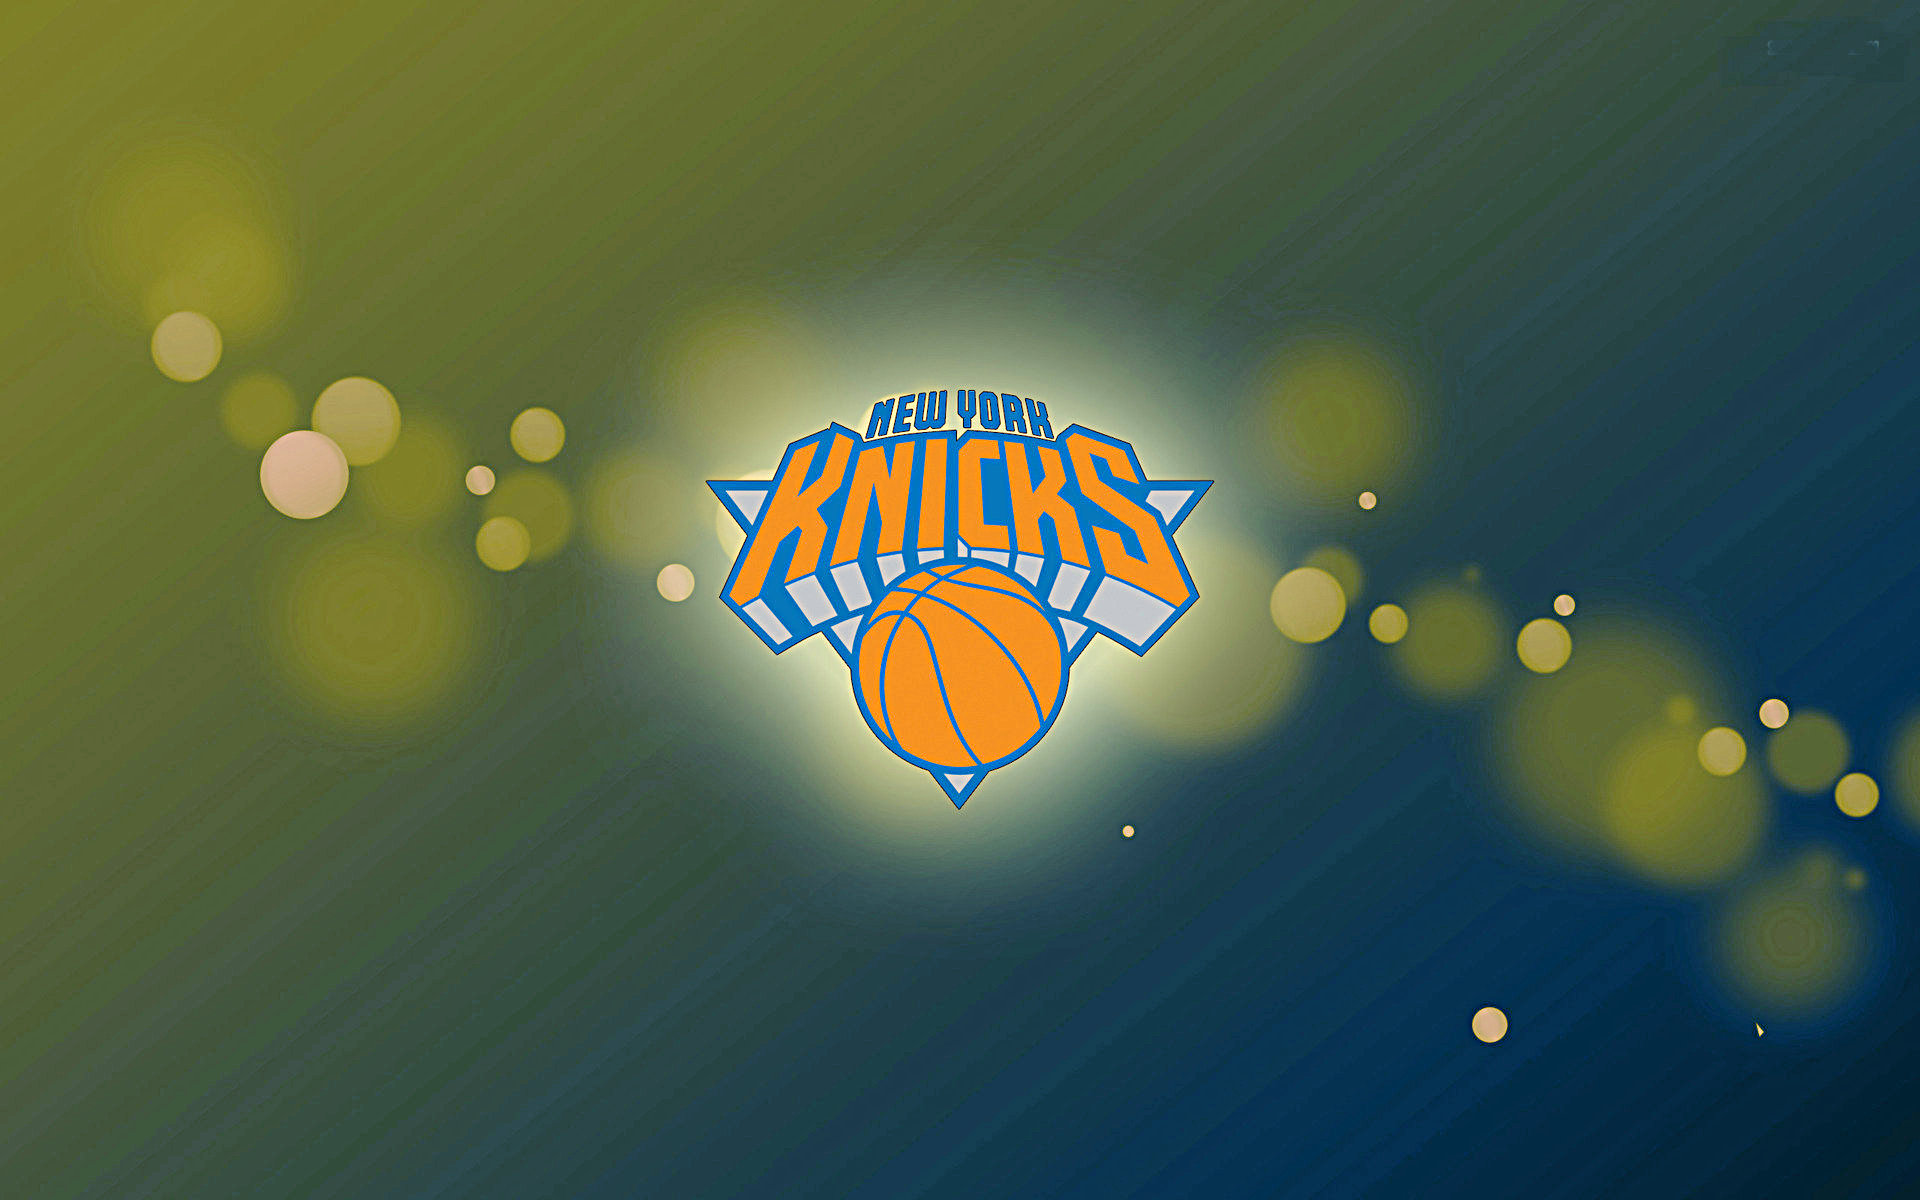 New York Knicks Wallpapers High Resolution and Quality. 76+ Knicks